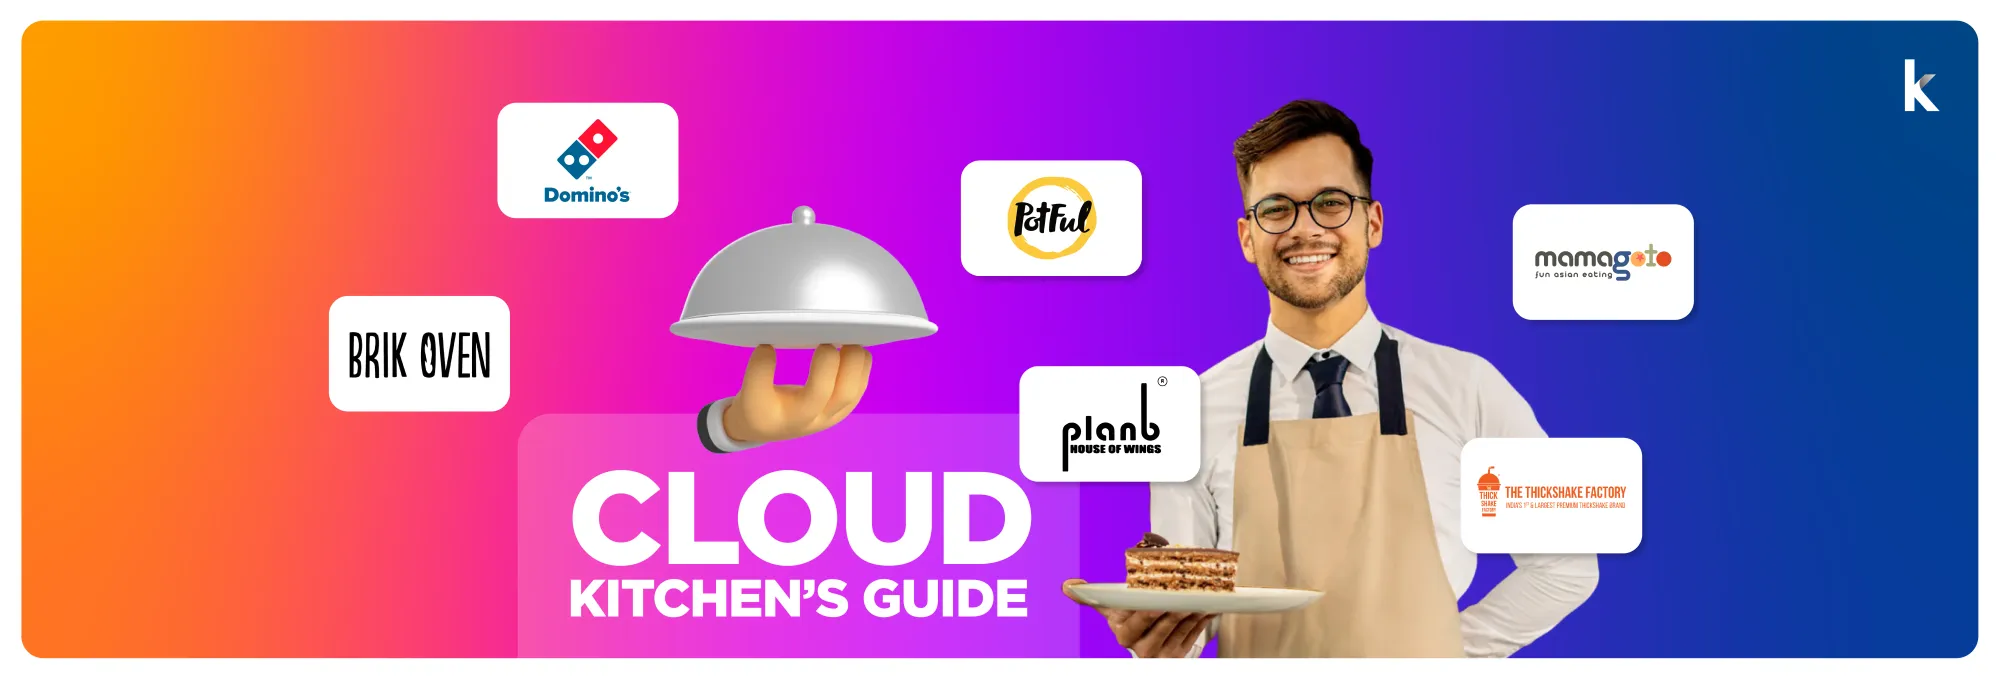 Zomato success 6-step growth guide for over 1.4 million cloud kitchens